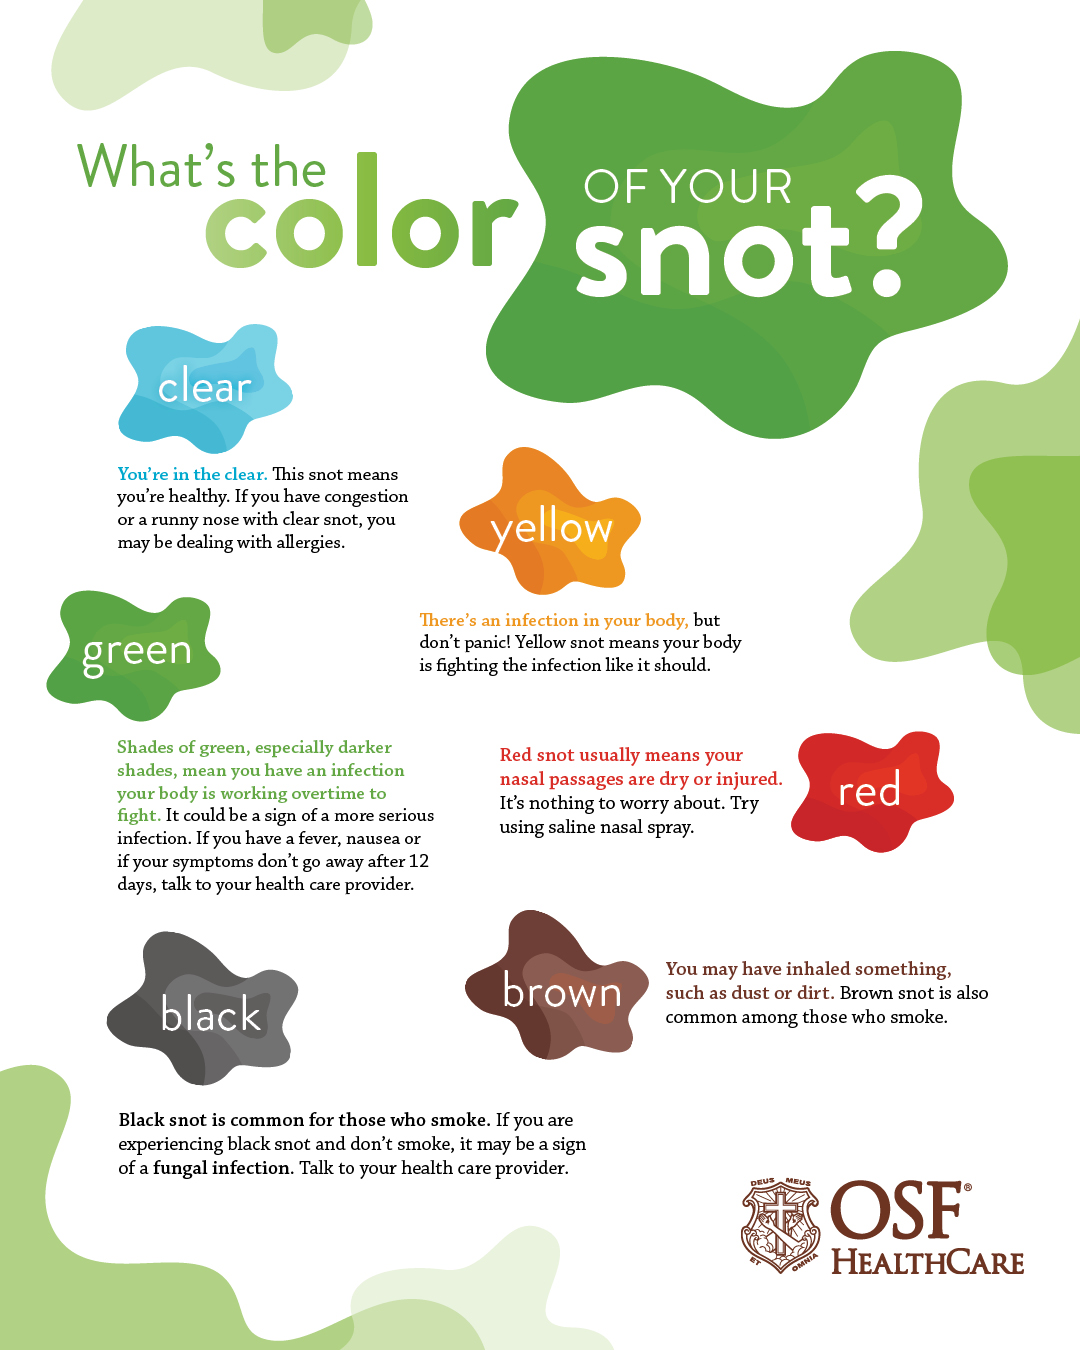 What the color of your snot means OSF HealthCare